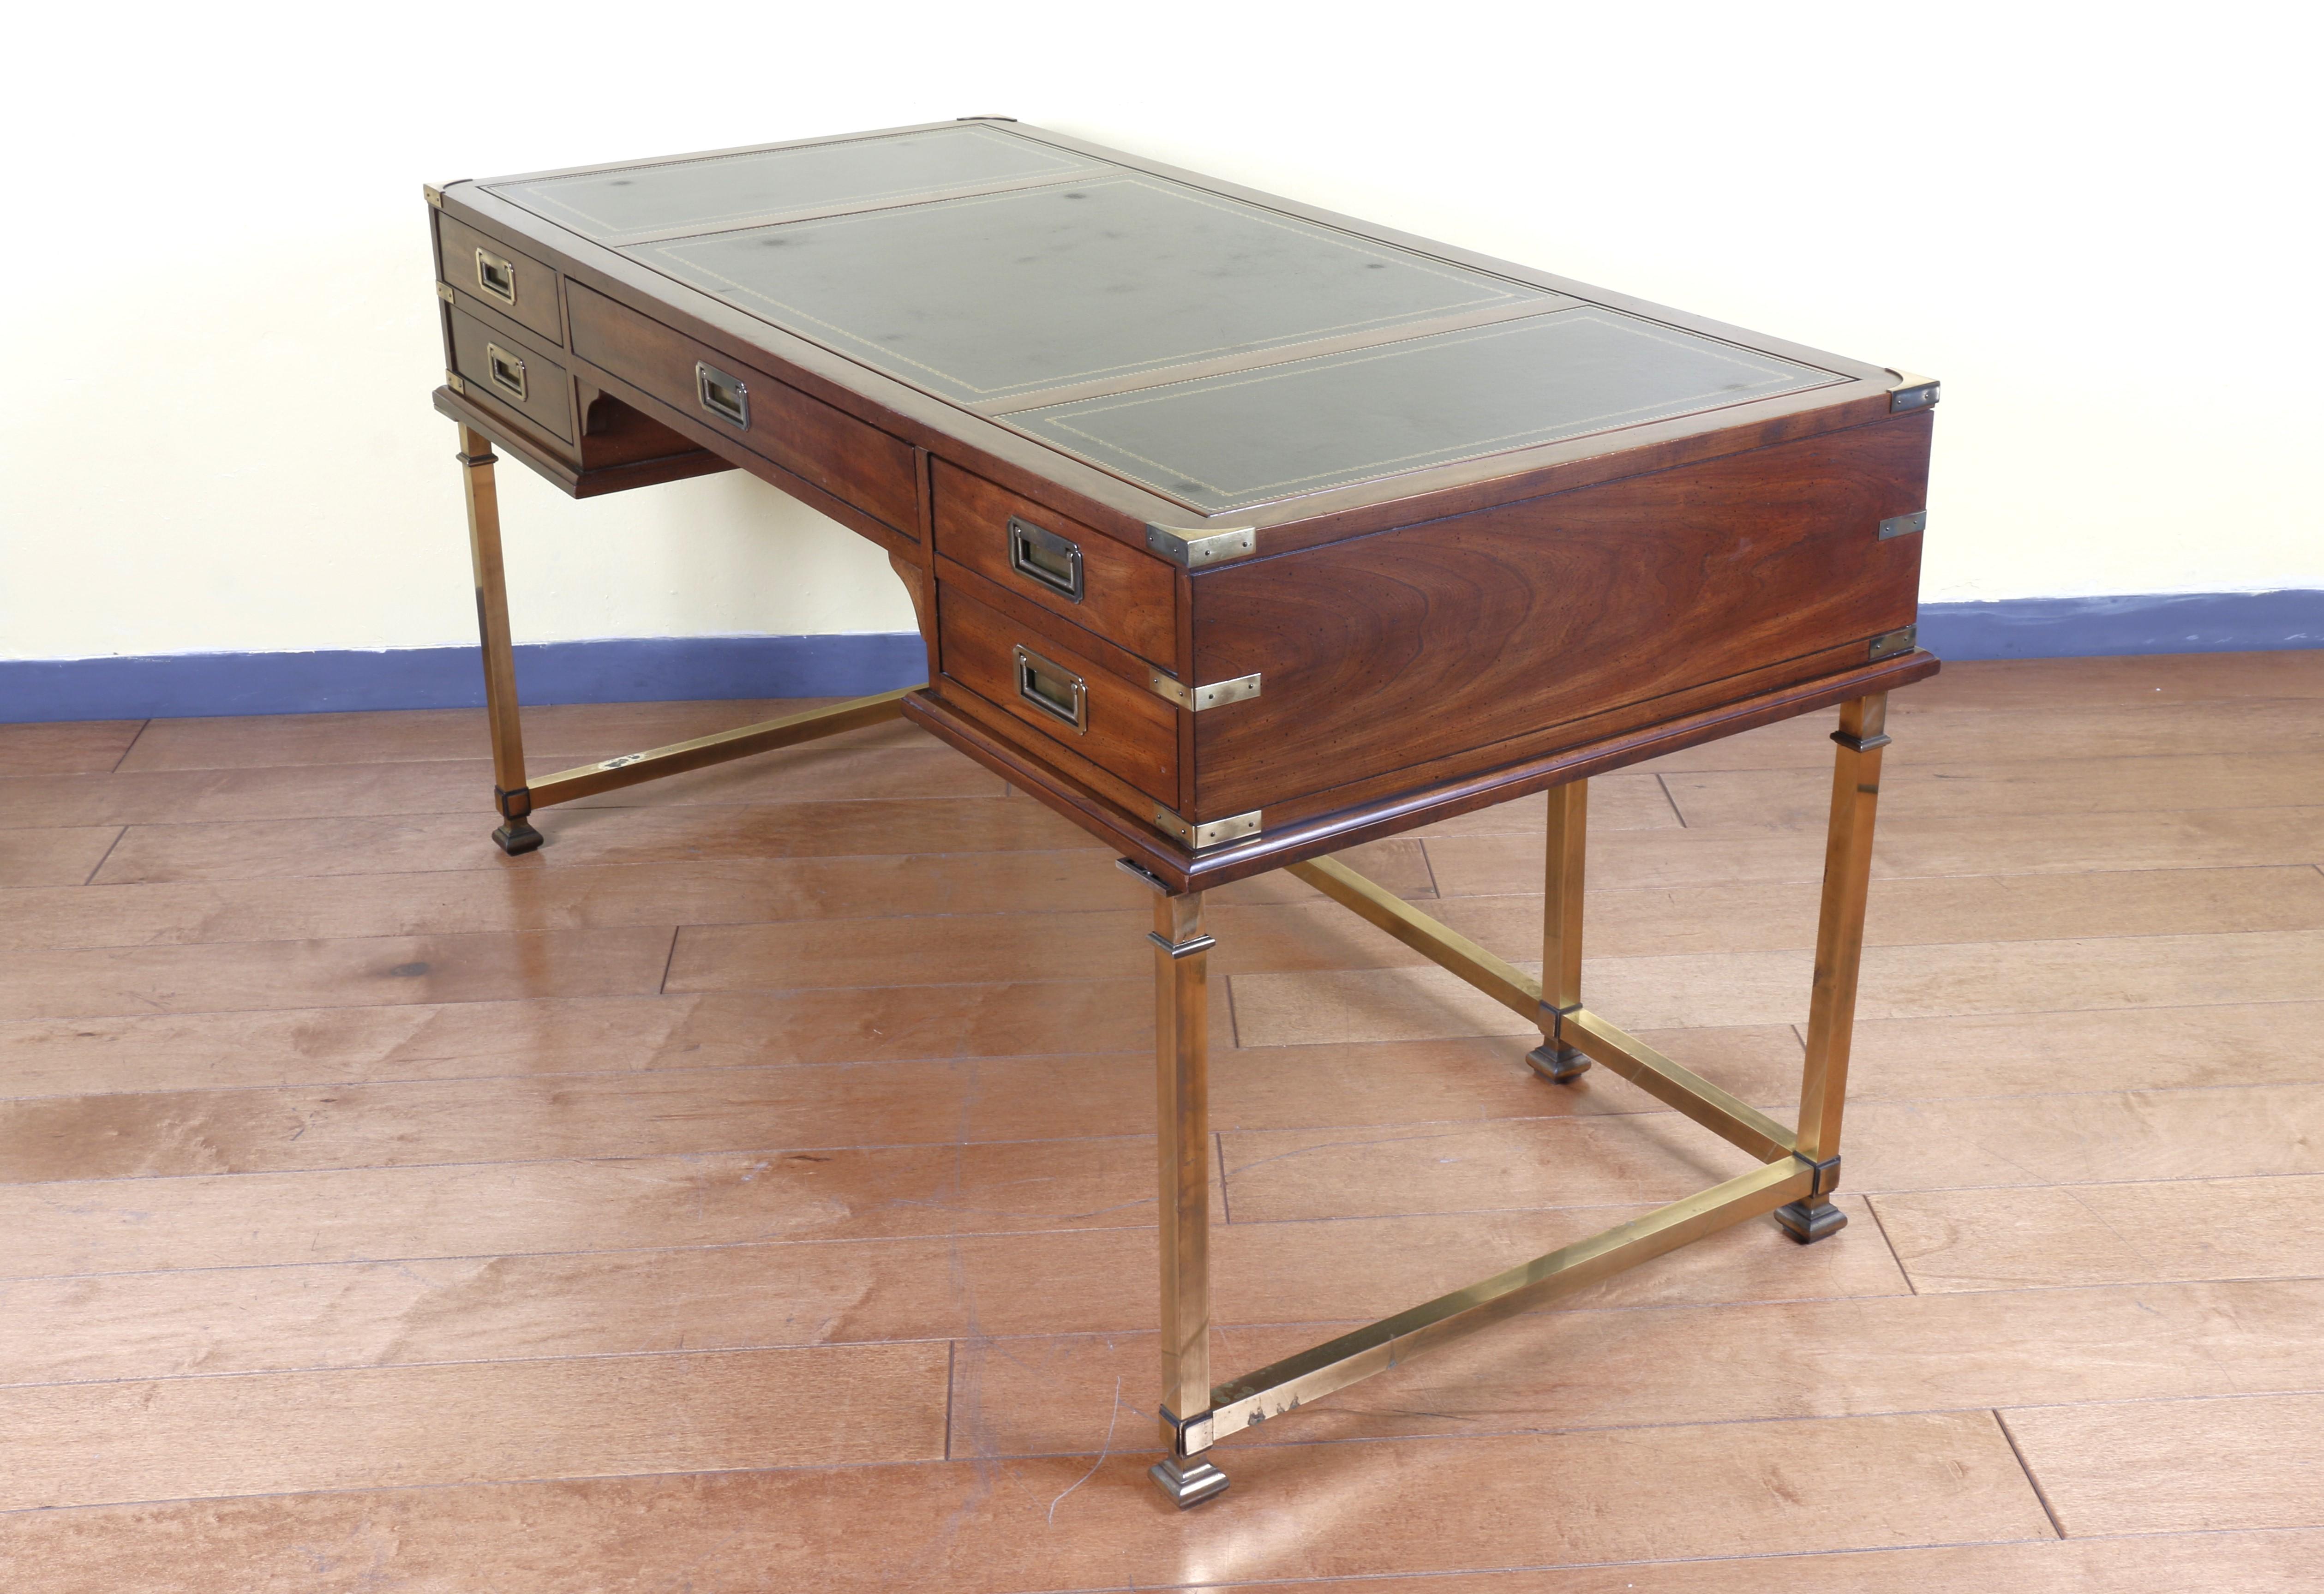 Wonderful Vintage Campaign Style Writing Desk manufactured by Sligh. Five drawers with brass handles, leather top, and its legs are brass. Original conditions. No broken parts. Will look gorgeous anywhere